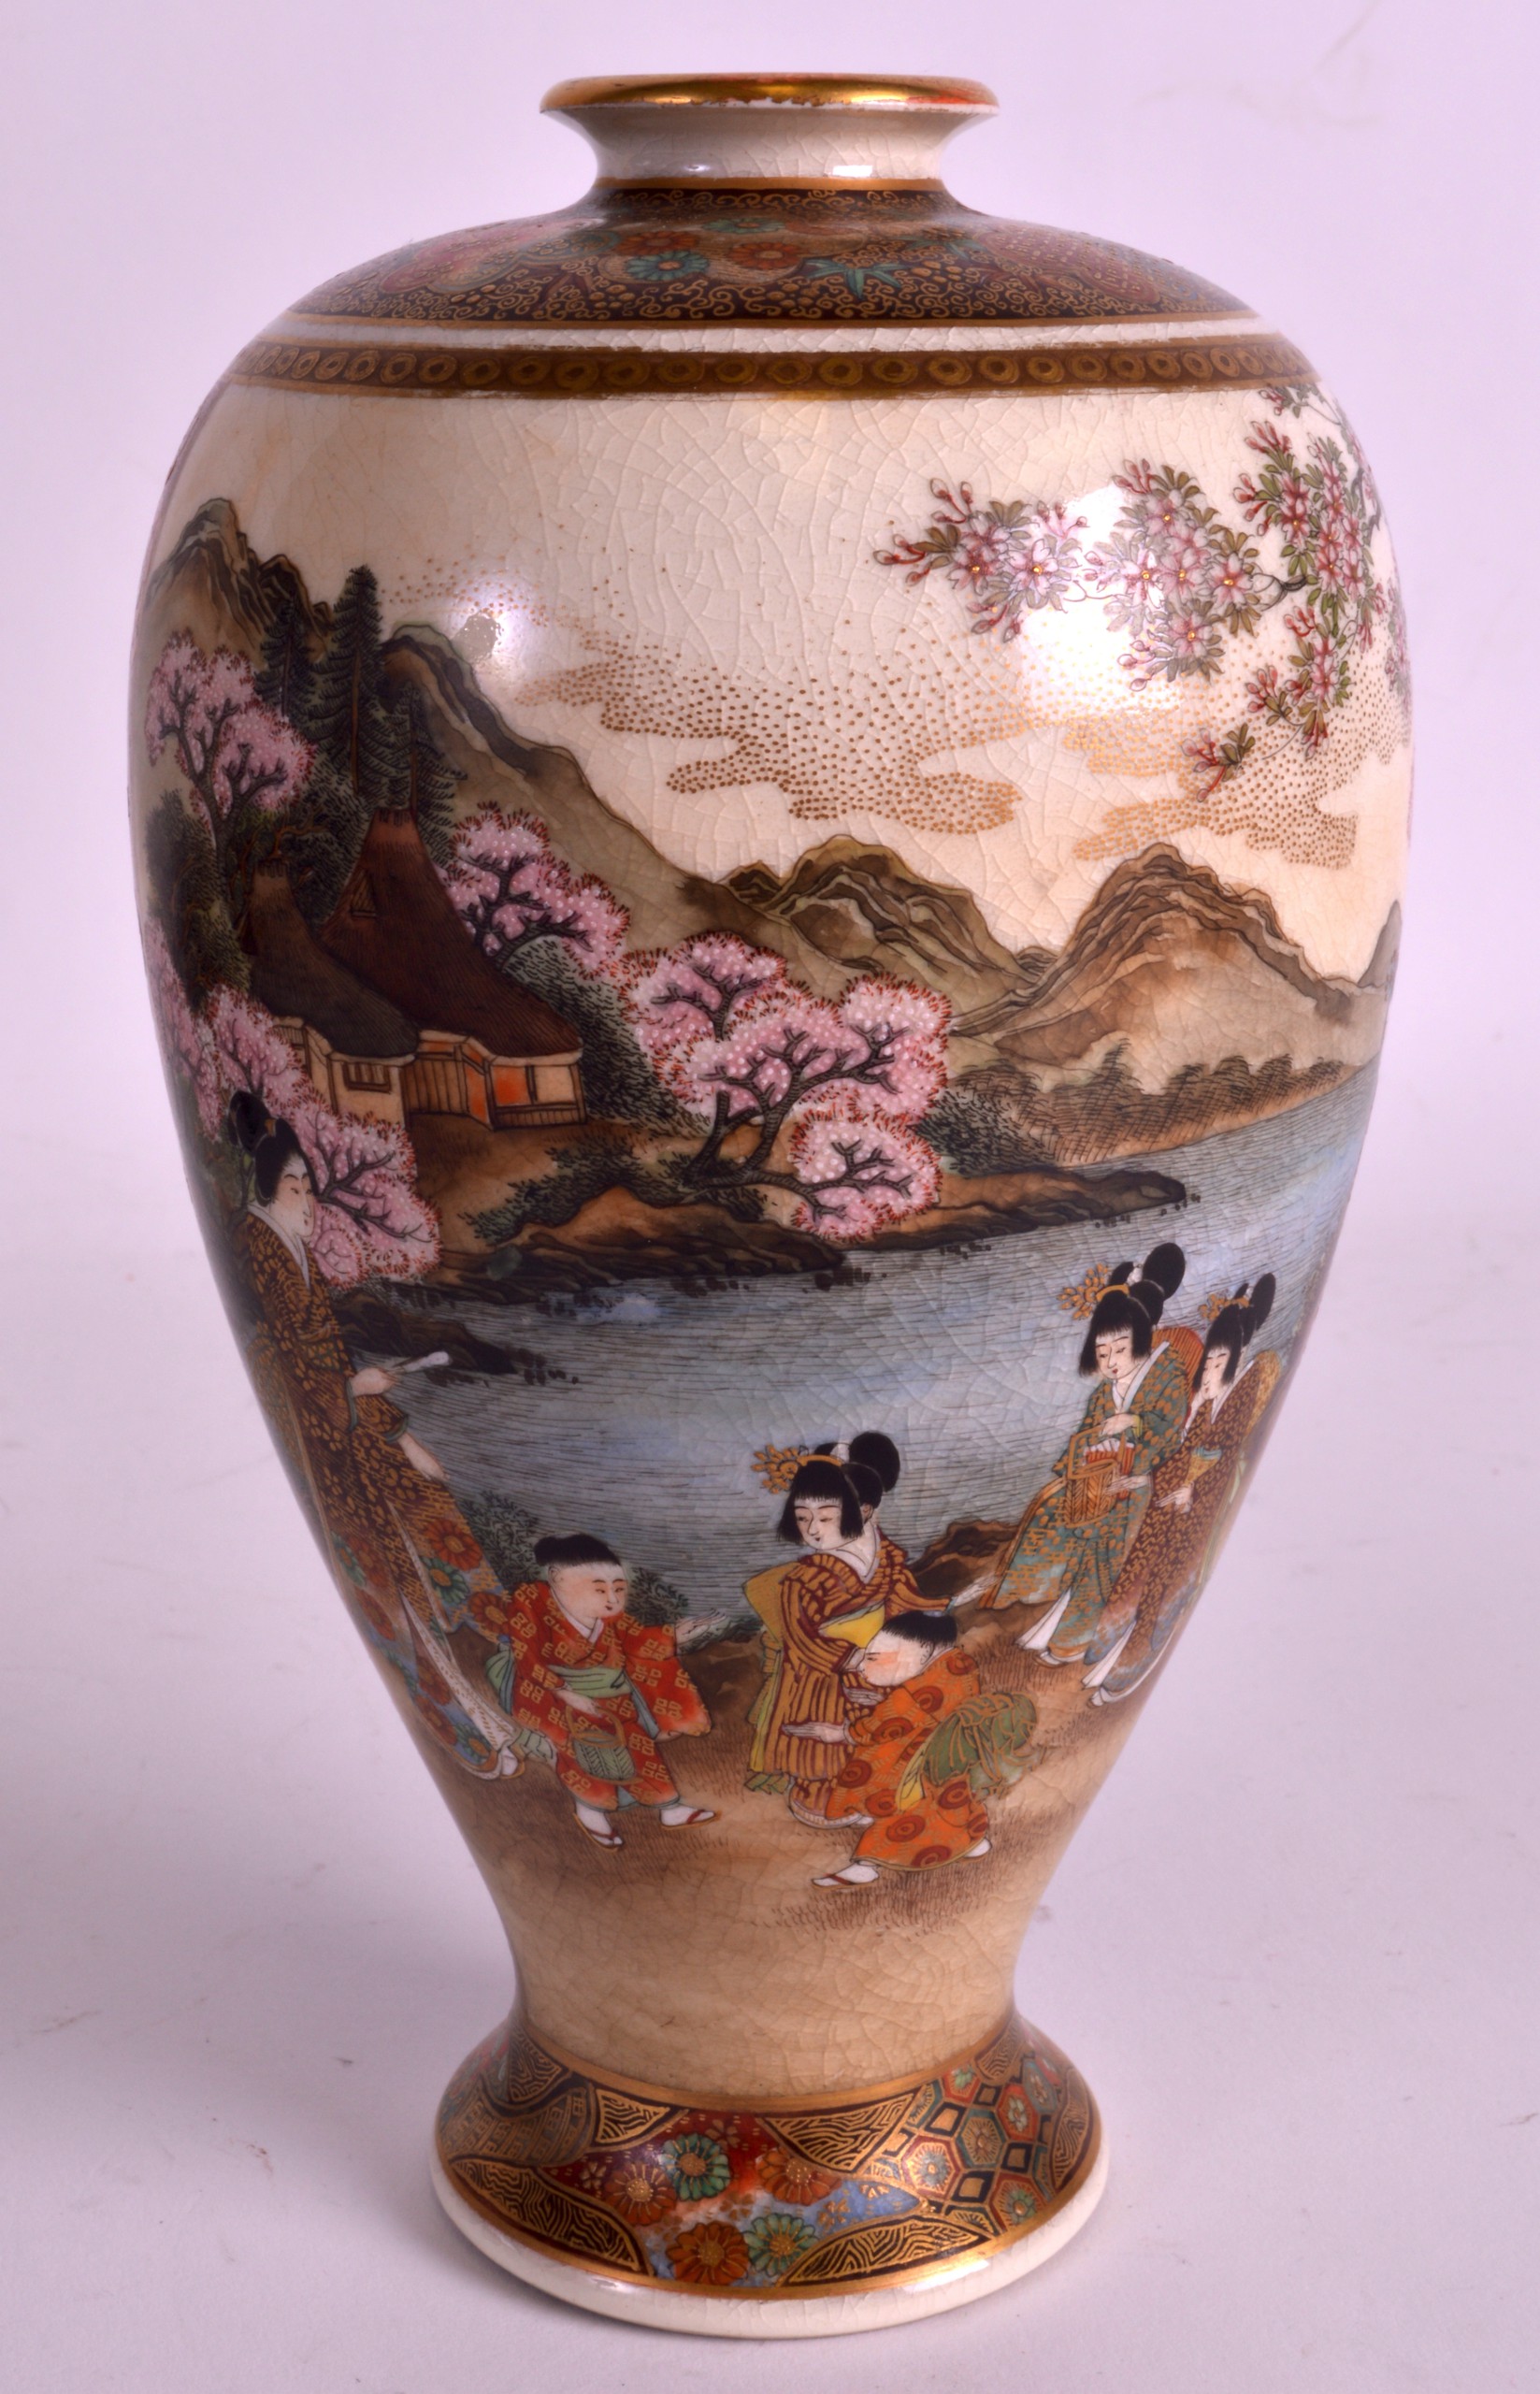 A FINE LATE 19TH CENTURY JAPANESE MEIJI PERIOD SATSUMA VASE by Ryozan, painted with geishas beside a